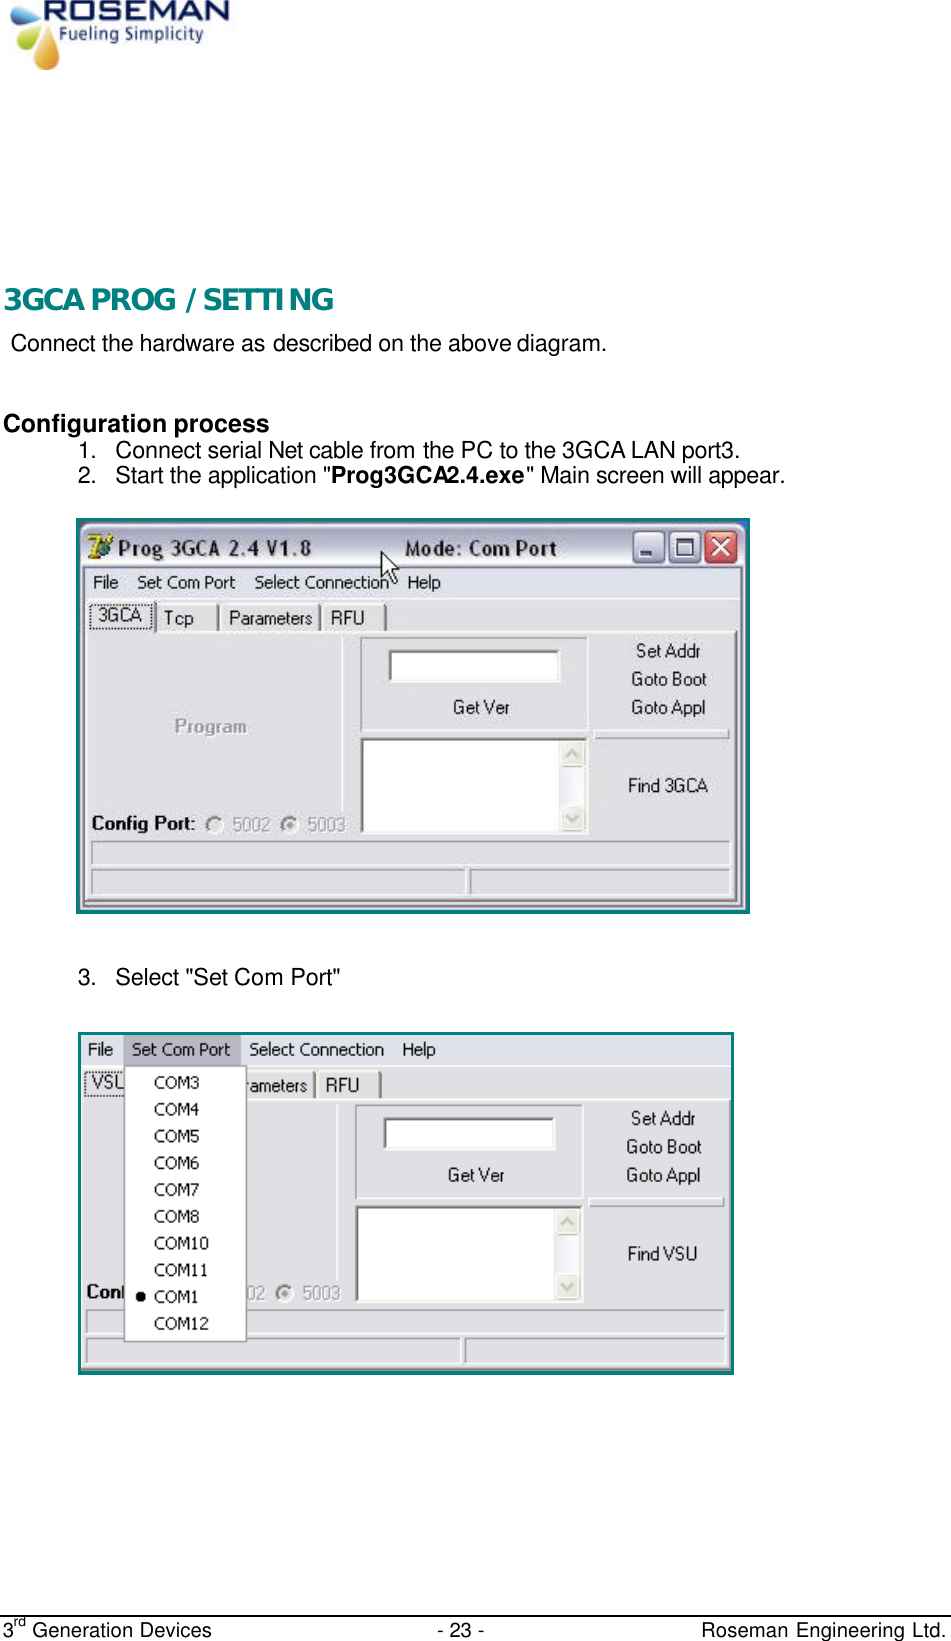  3rd Generation Devices - 23 -   Roseman Engineering Ltd.    3GCA PROG /SETTING Connect the hardware as described on the above diagram. Configuration process 1. Connect serial Net cable from the PC to the 3GCA LAN port3. 2. Start the application &quot;Prog3GCA2.4.exe&quot; Main screen will appear.     3. Select &quot;Set Com Port&quot;            